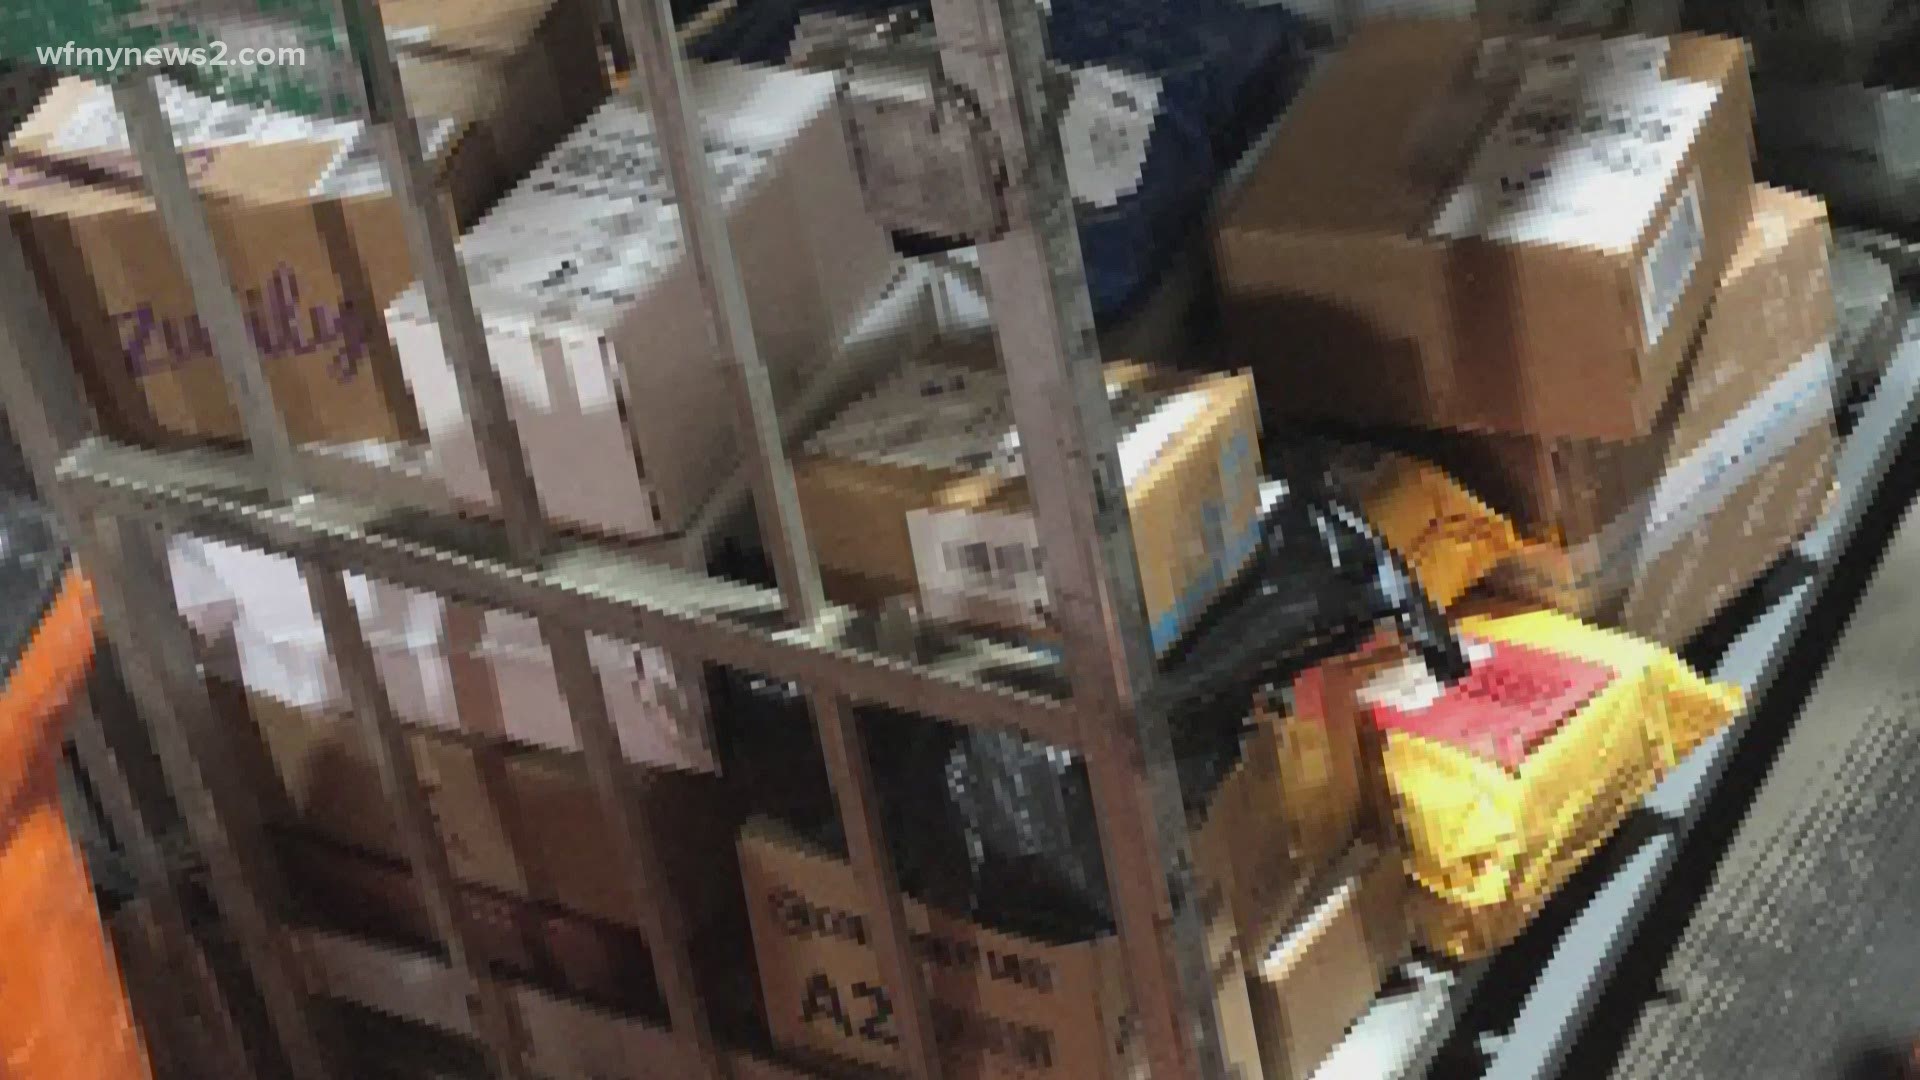 A scathing new internal audit shows what happened to all the packages that went missing over the holiday shipping season.